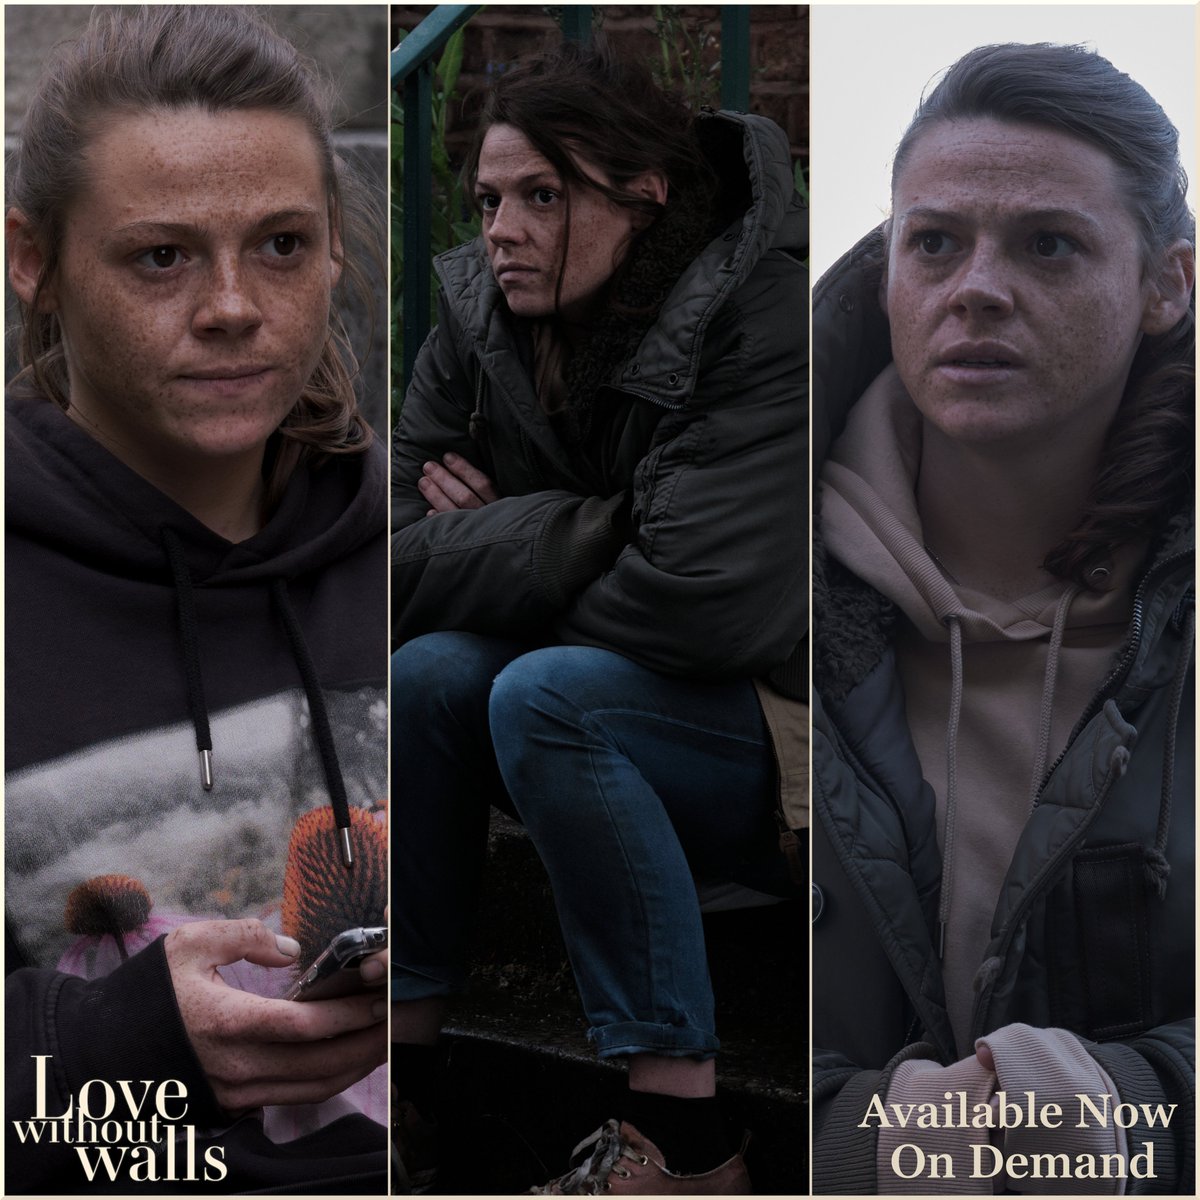 Did you know that women are more likely experience #hiddenhomelessness than men?

Typically choosing places hidden from view, spending time in 24 hour services or even disguising themselves as men, meaning they remain hidden for longer

#LoveWithoutWalls | lovewithoutwallsfilm.com